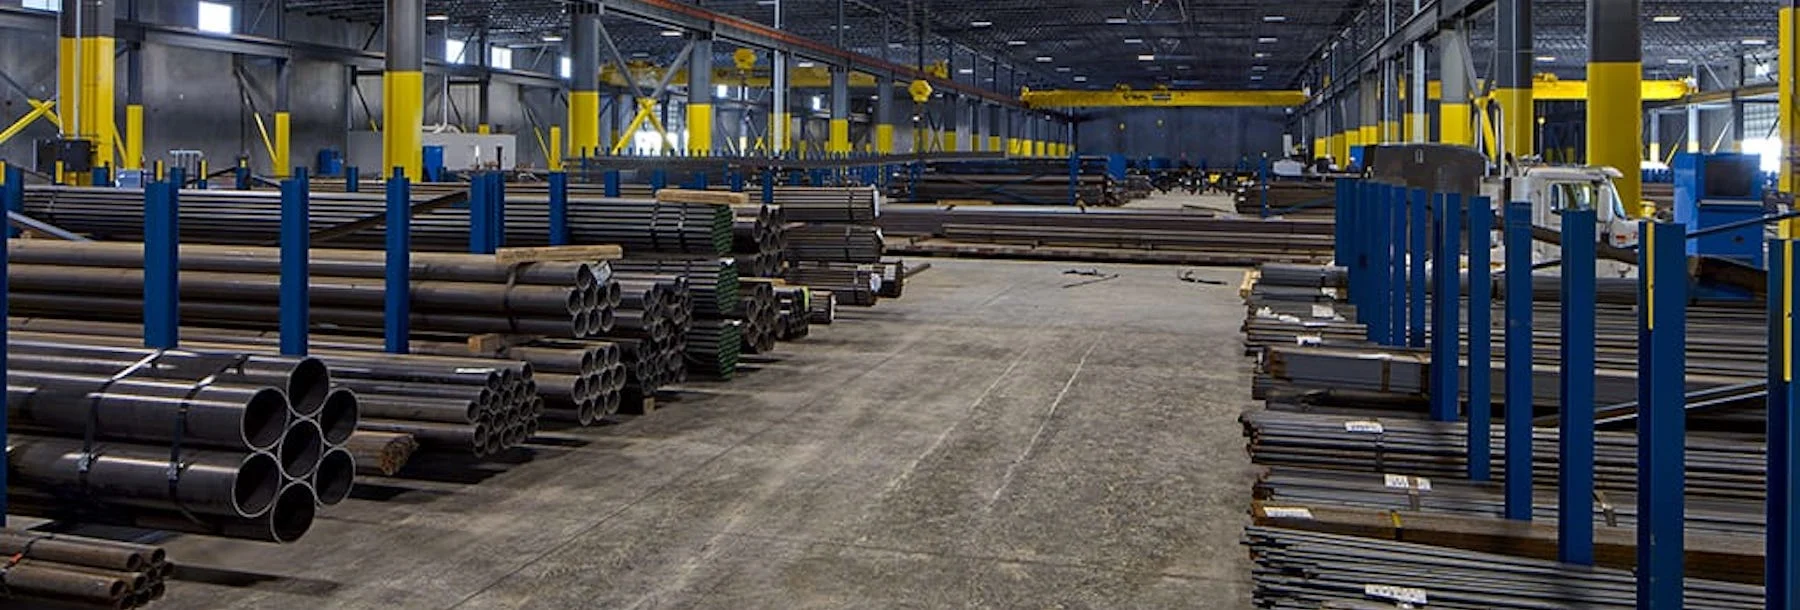 O'Neal Steel decreases time spent reviewing footage by 92% with Site Visibility